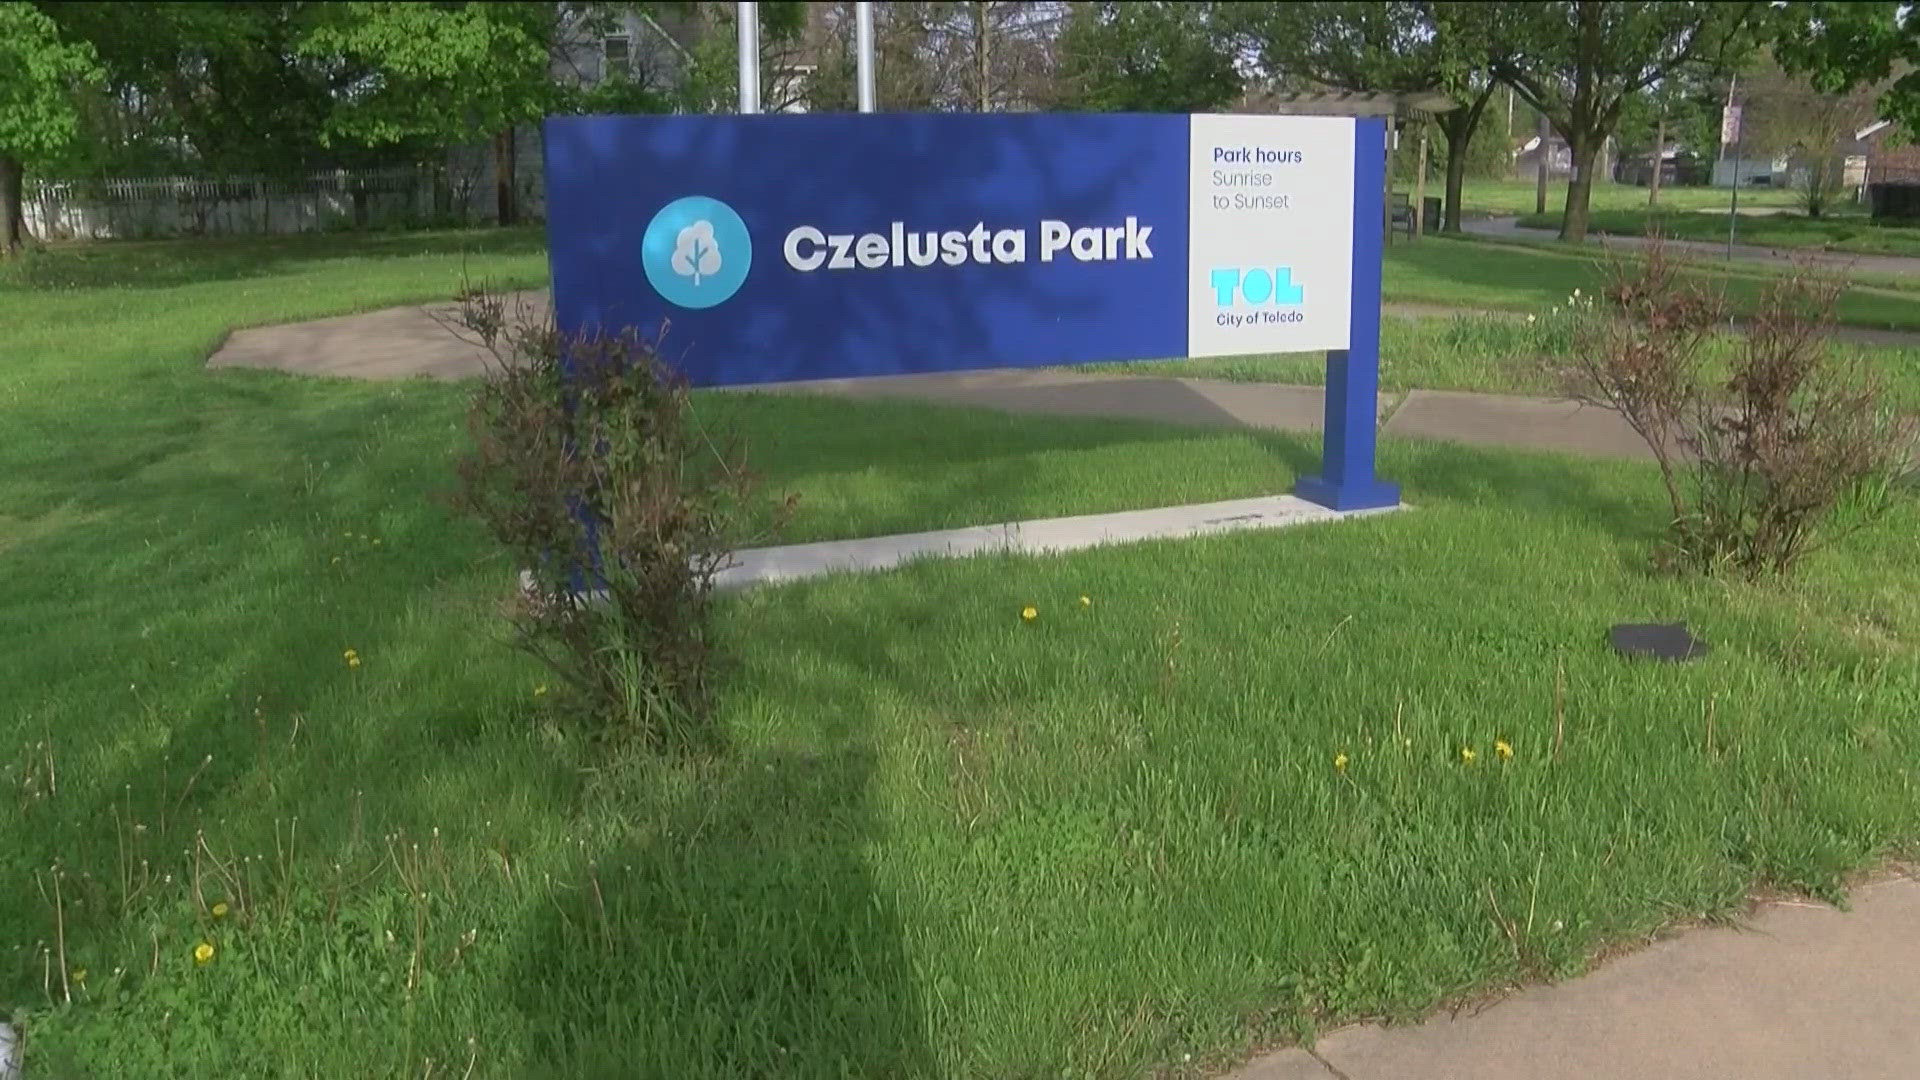 The clean-up event at Czelusta Park is Saturday, May 11 at 9 a.m.